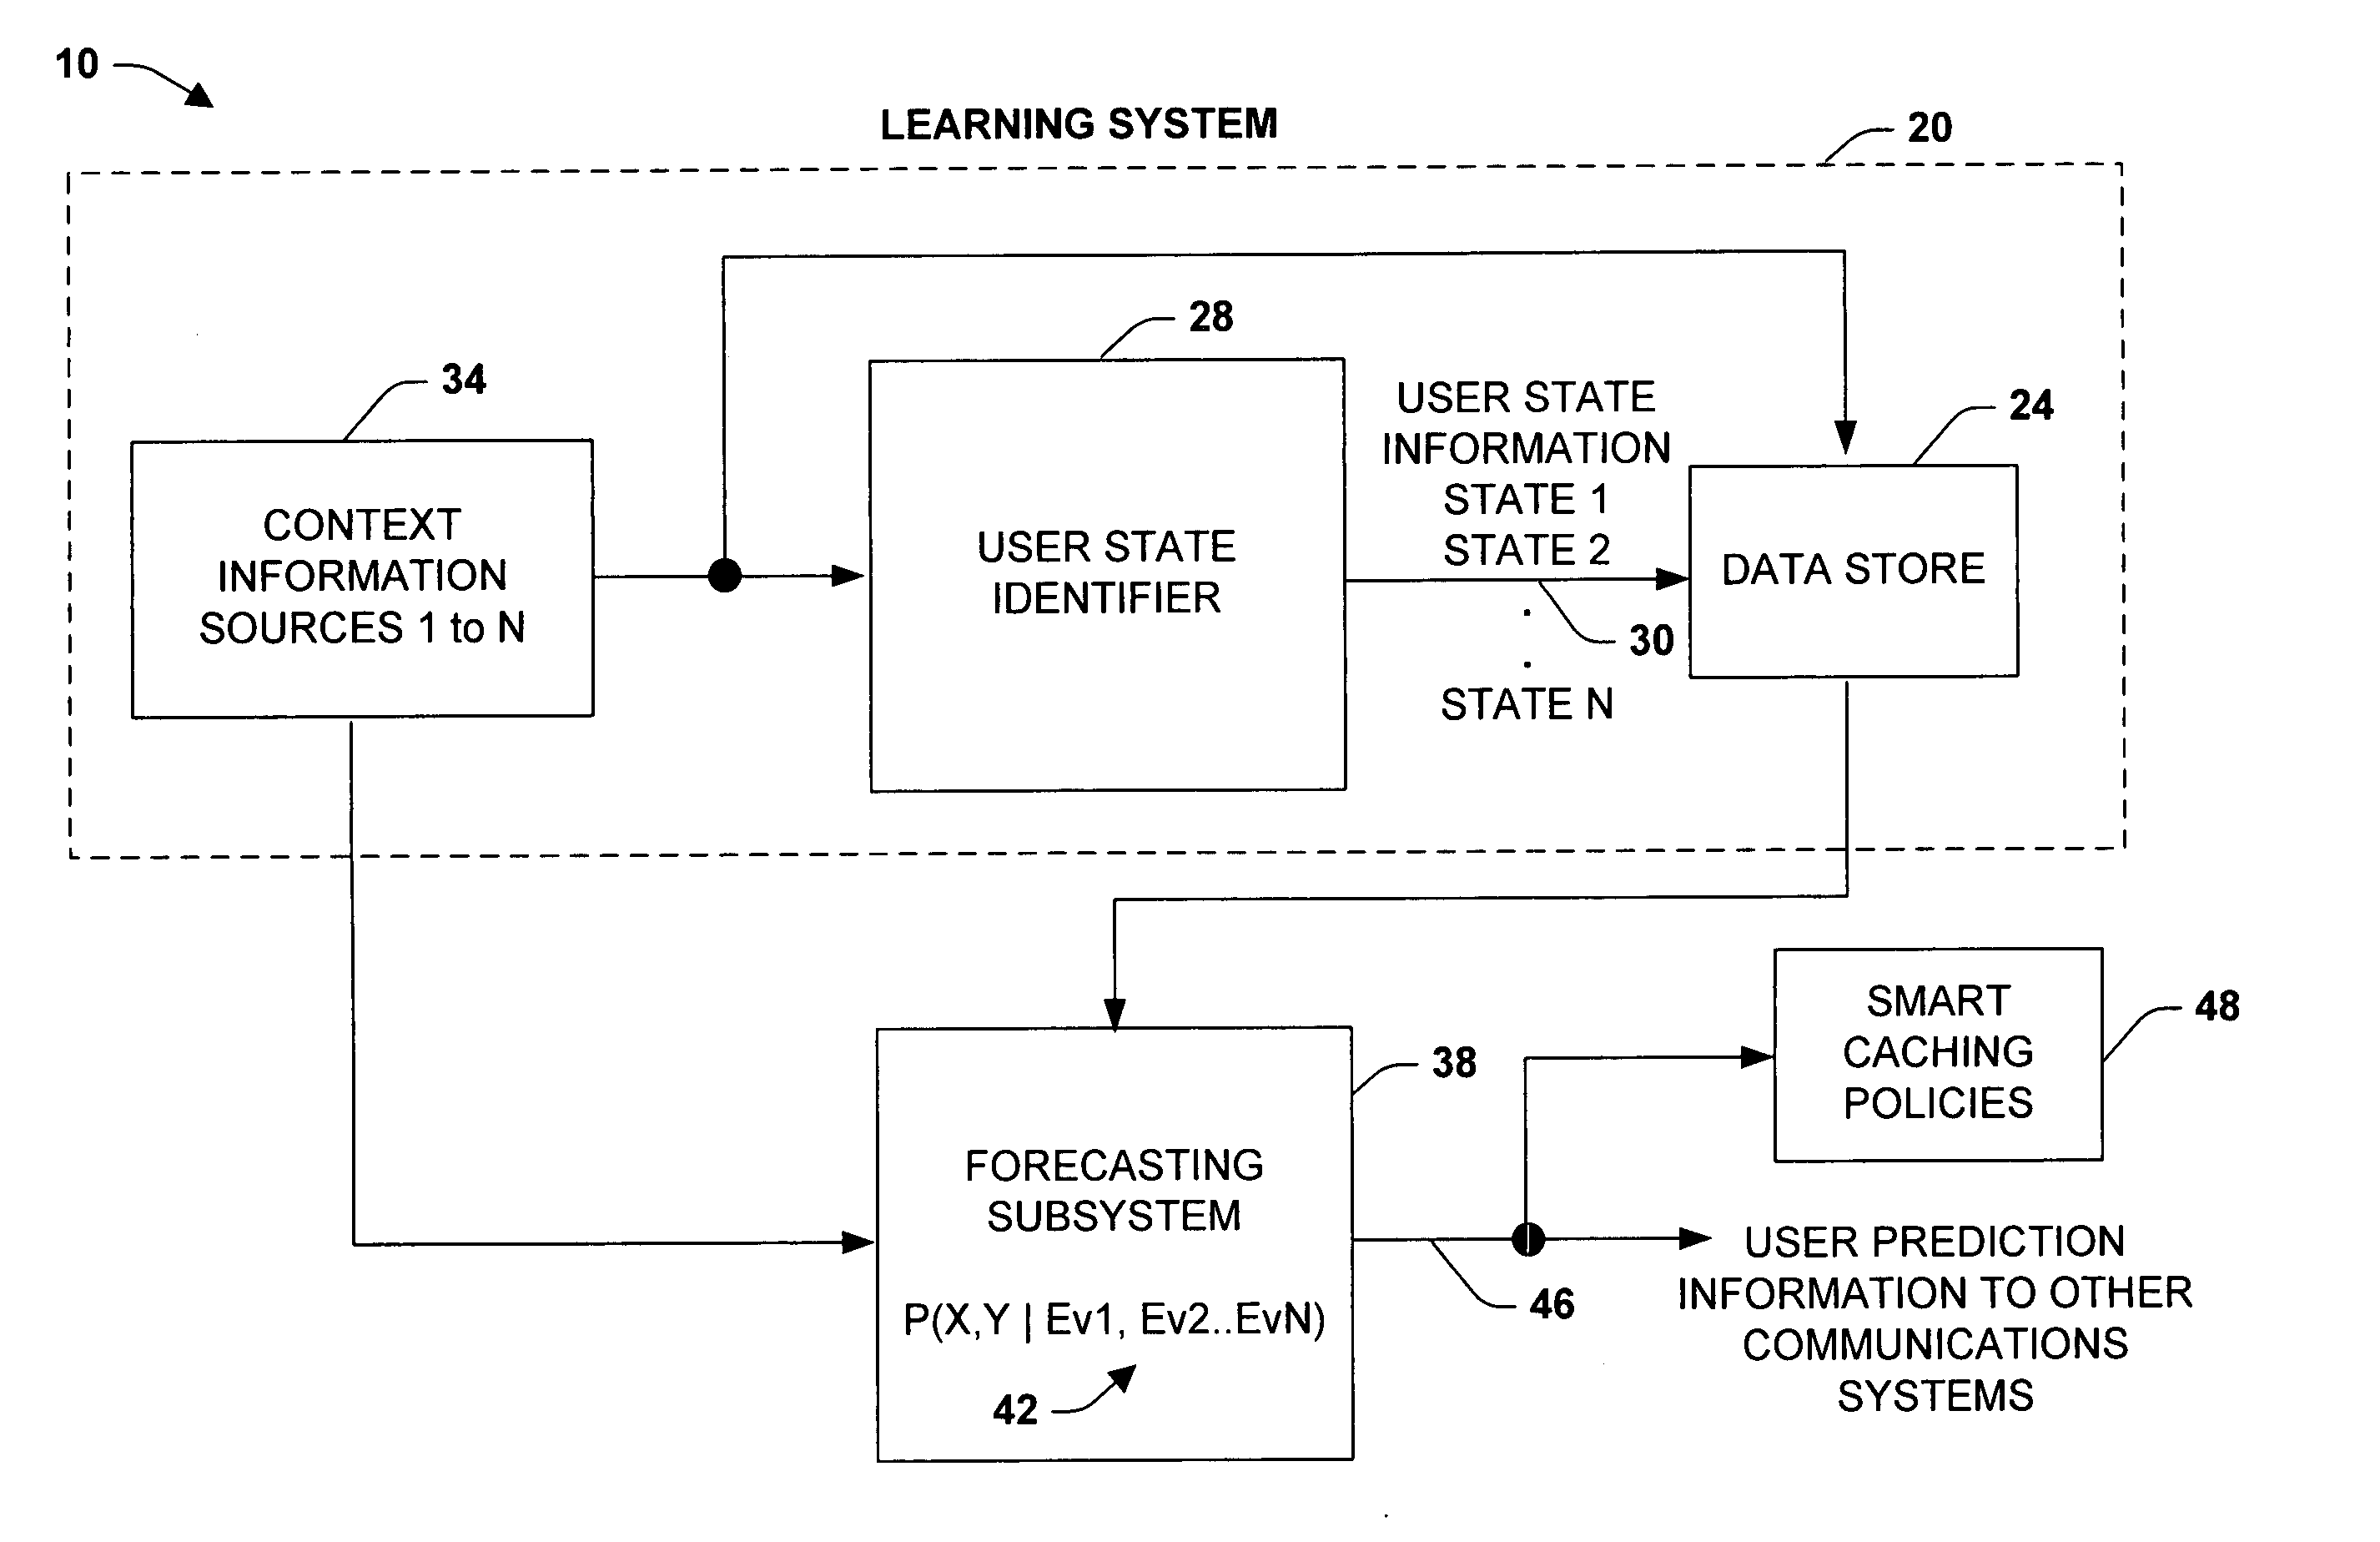 Methods for and applications of learning and inferring the periods of time until people are available or unavailable for different forms of communication, collaboration, and information access